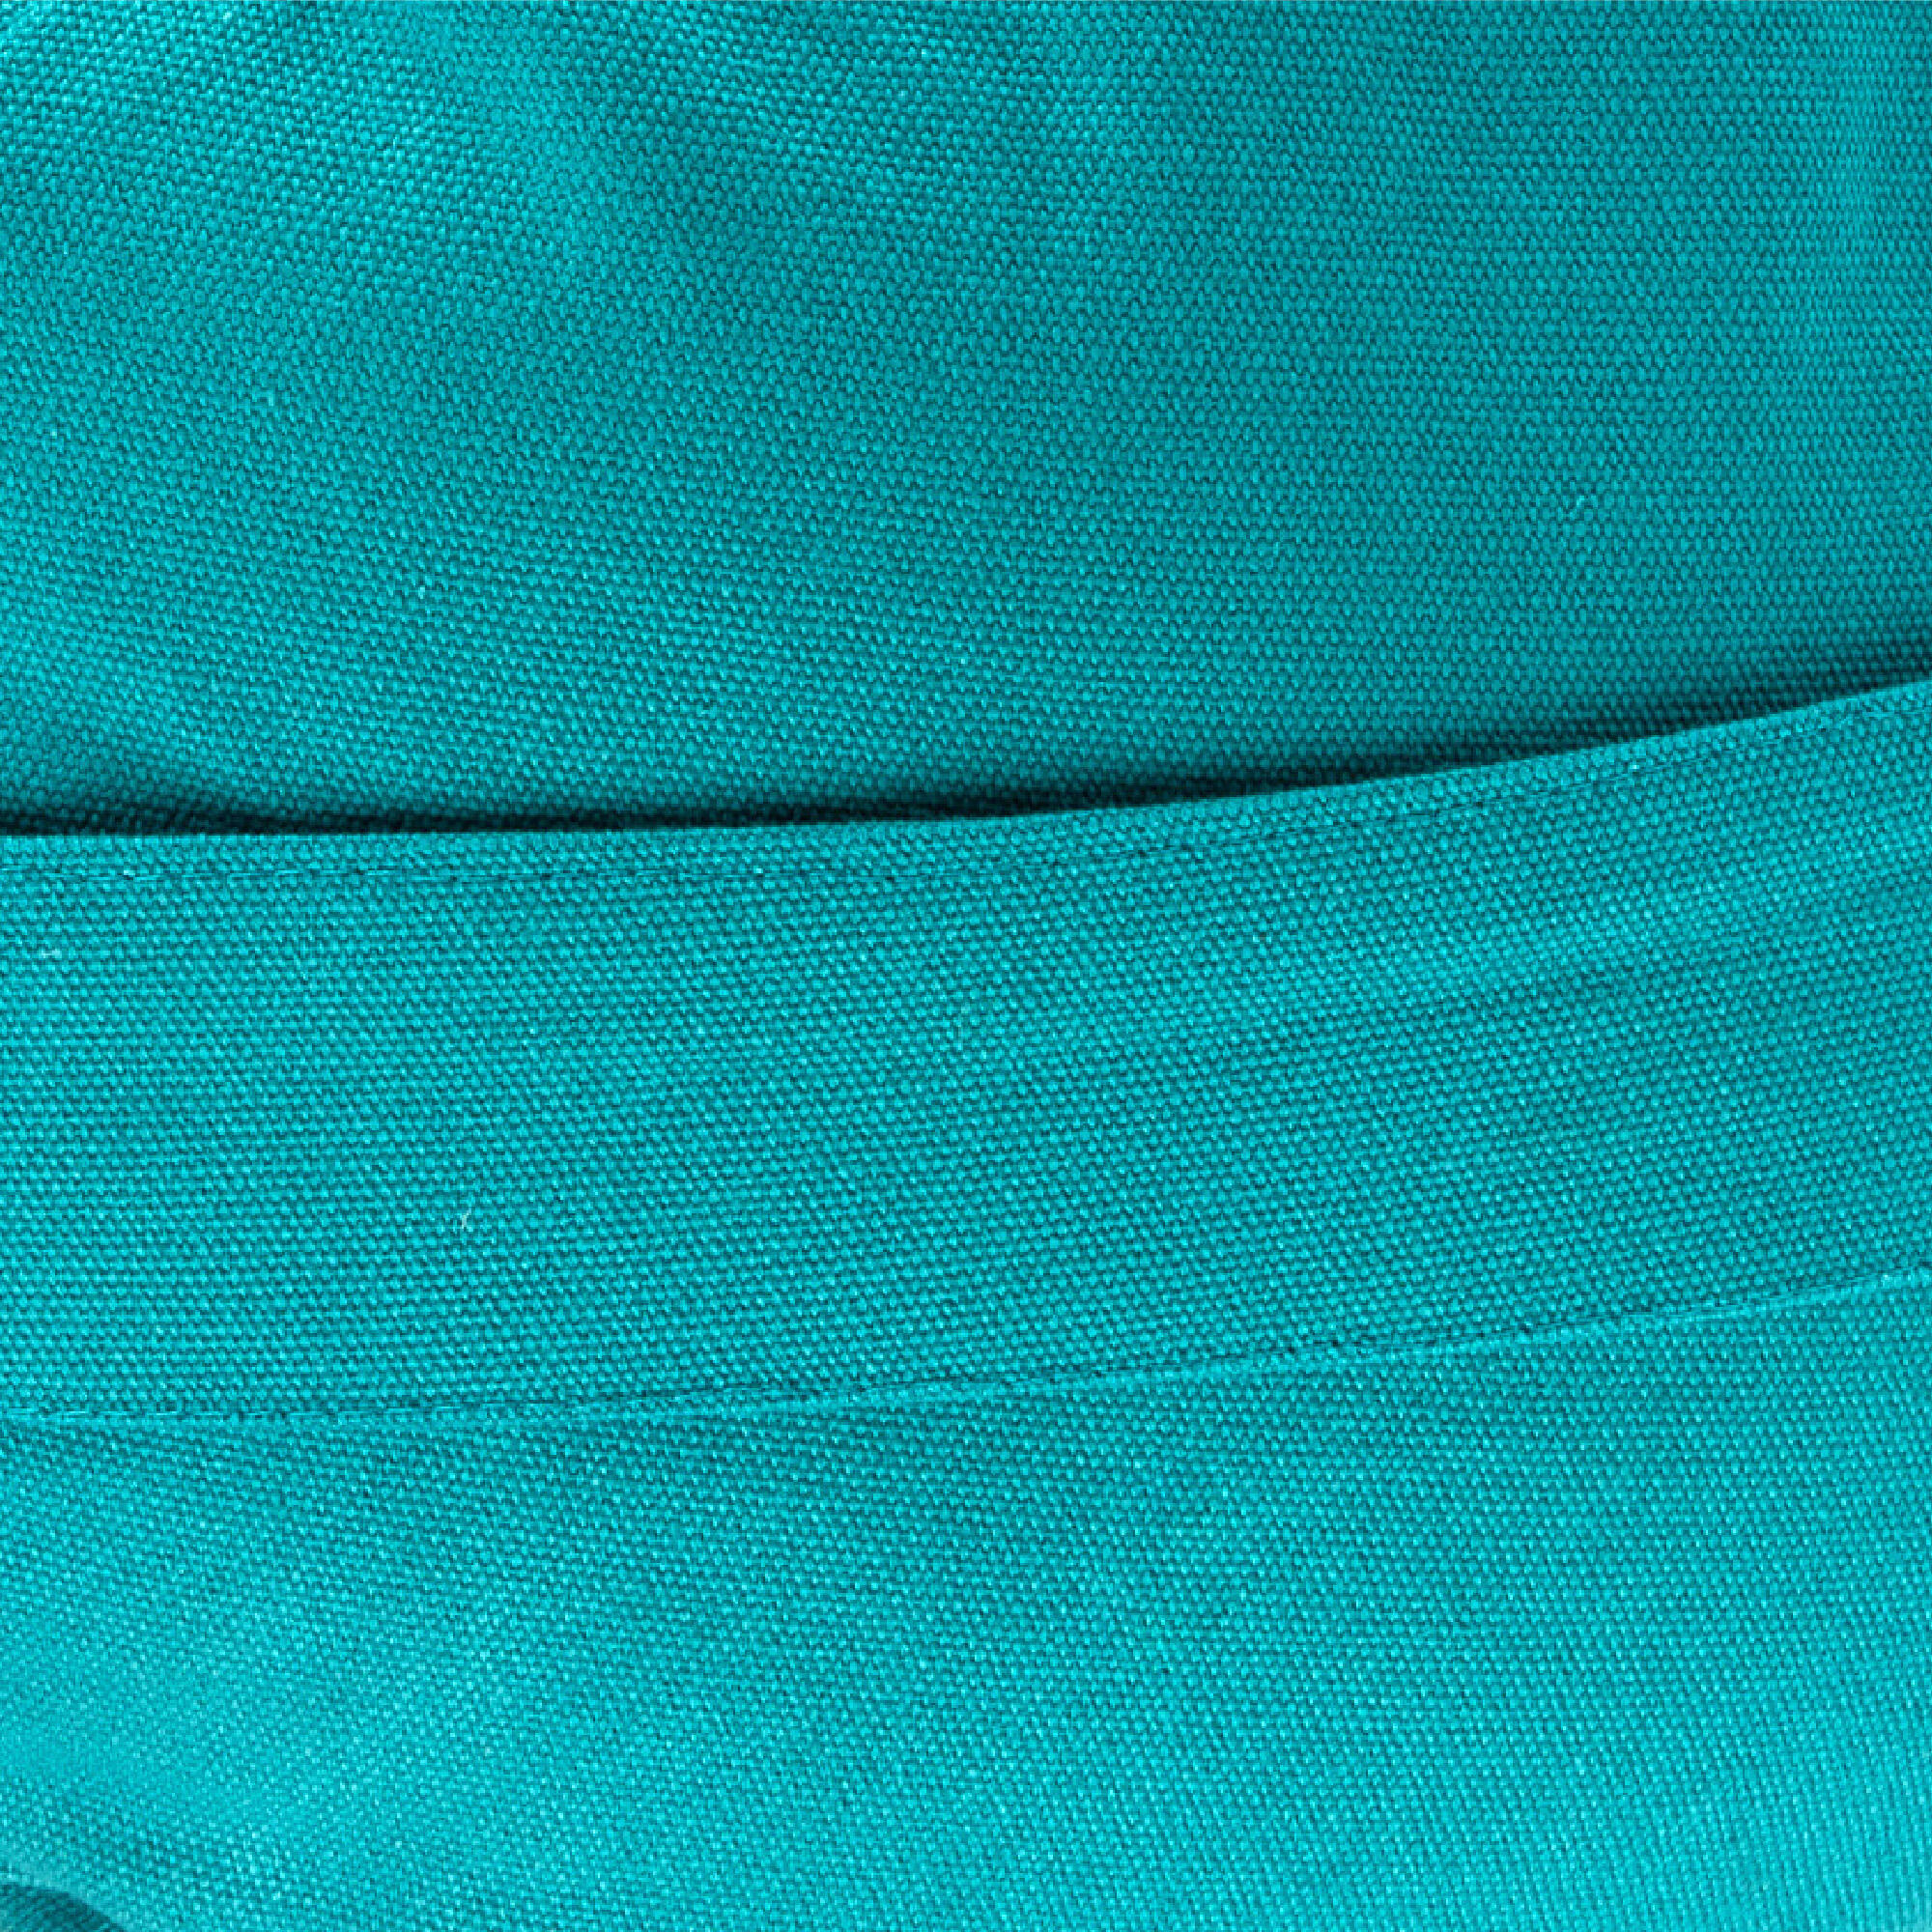 Myga Support Bolster Pillow - Turquoise 5/8